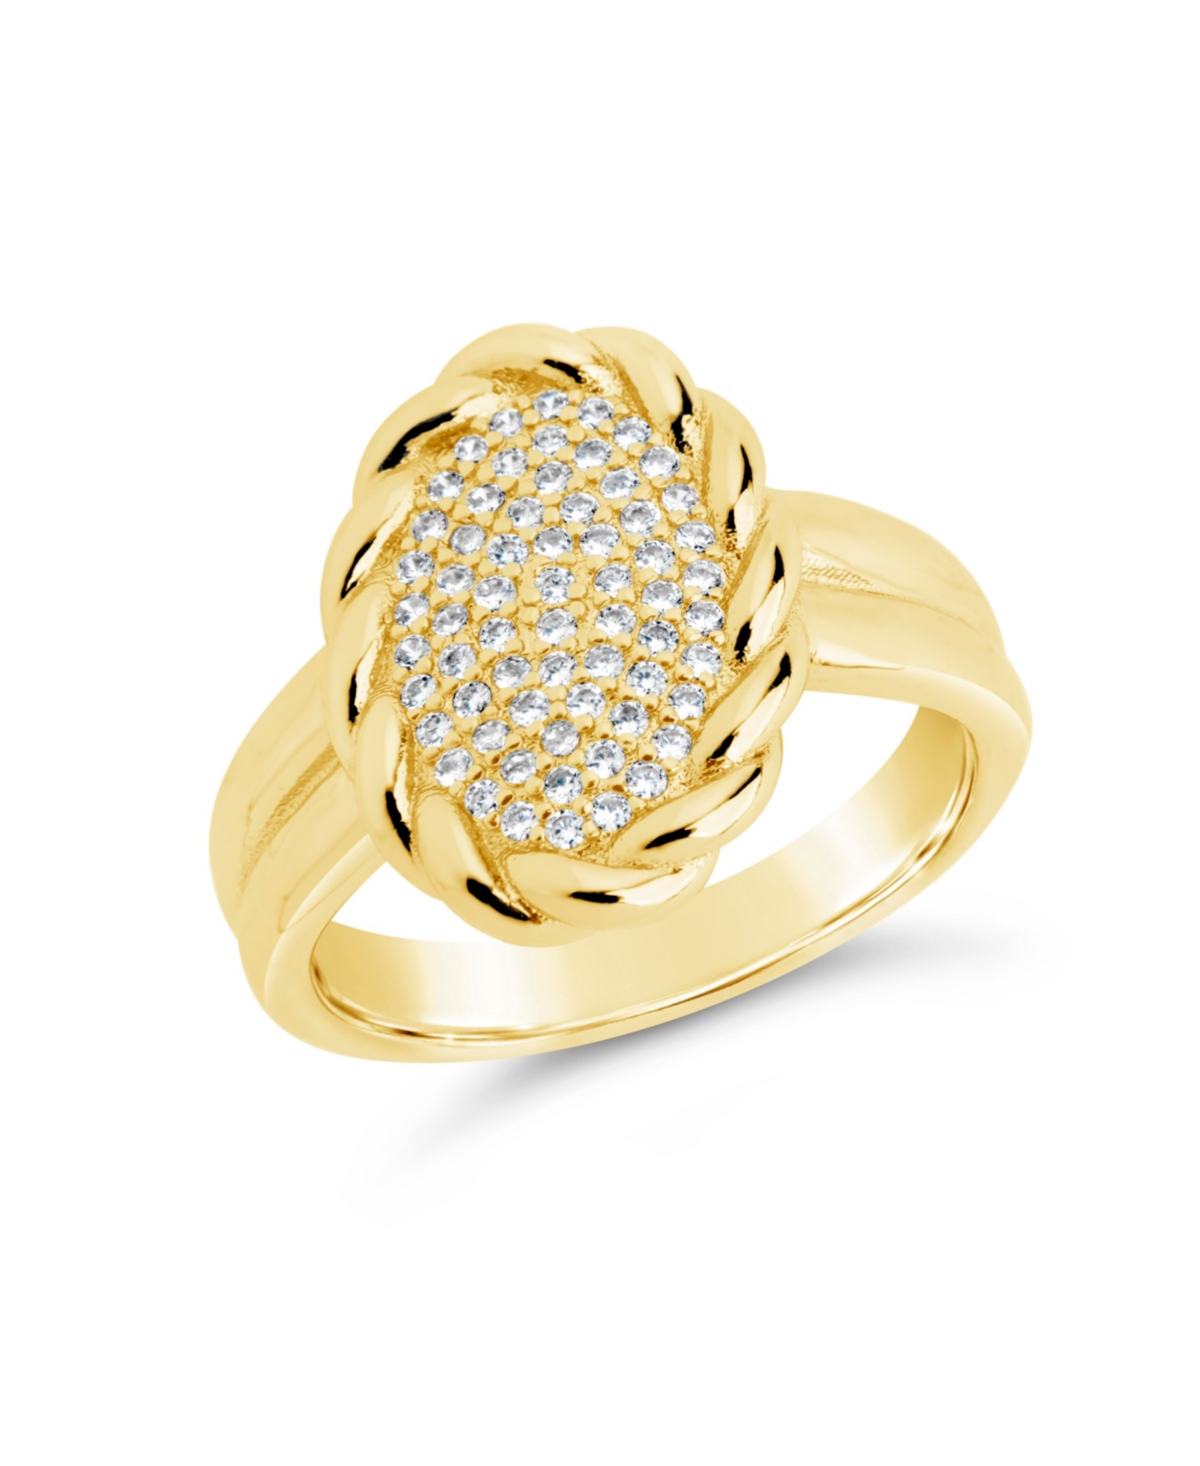 Silver-Tone or Gold-Tone Cubic Zirconia Detailed Statement Galette Ring - Silver